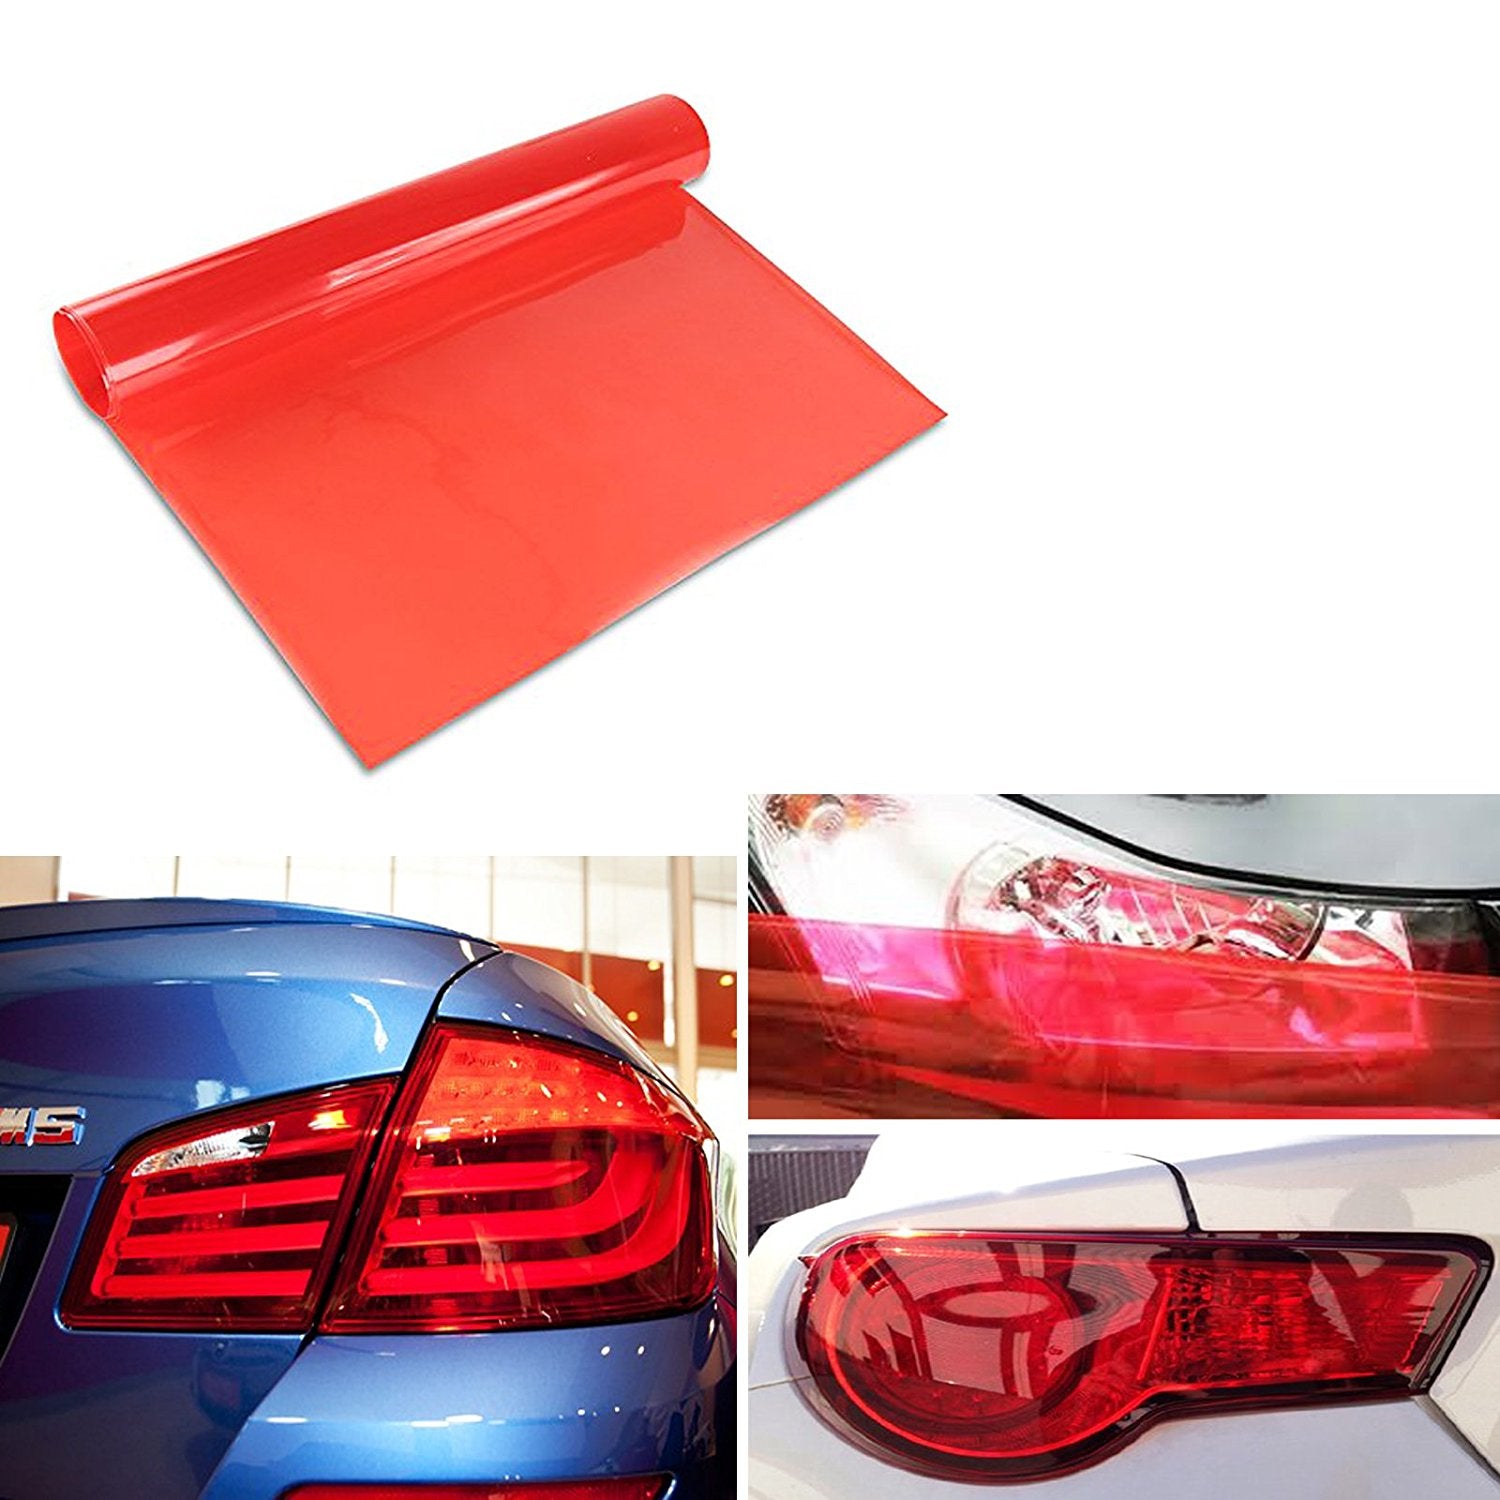 12 x 48 Glossy Red Vinyl Sheet Wrap Overlay Film For Tail Lights, Si